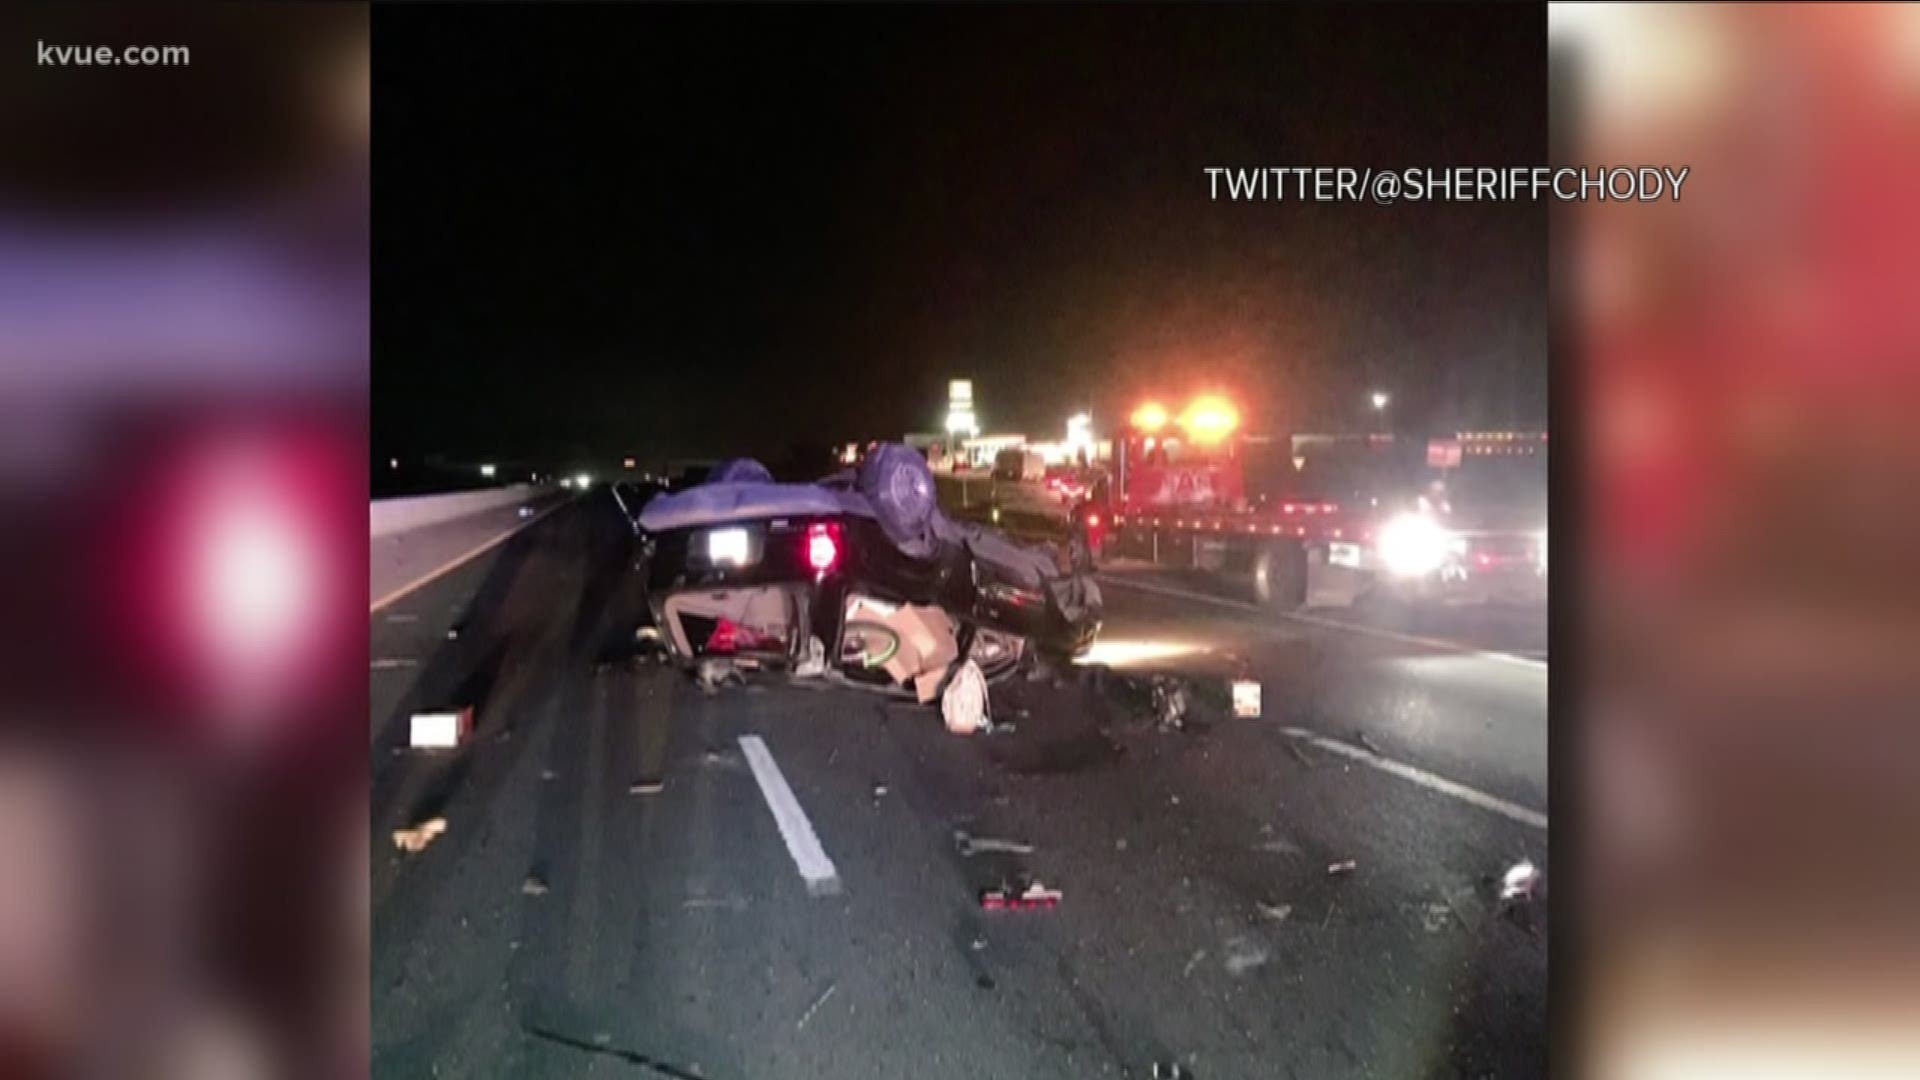 The wreck happened at about 4:40 a.m. near the Ronald Reagan exit.